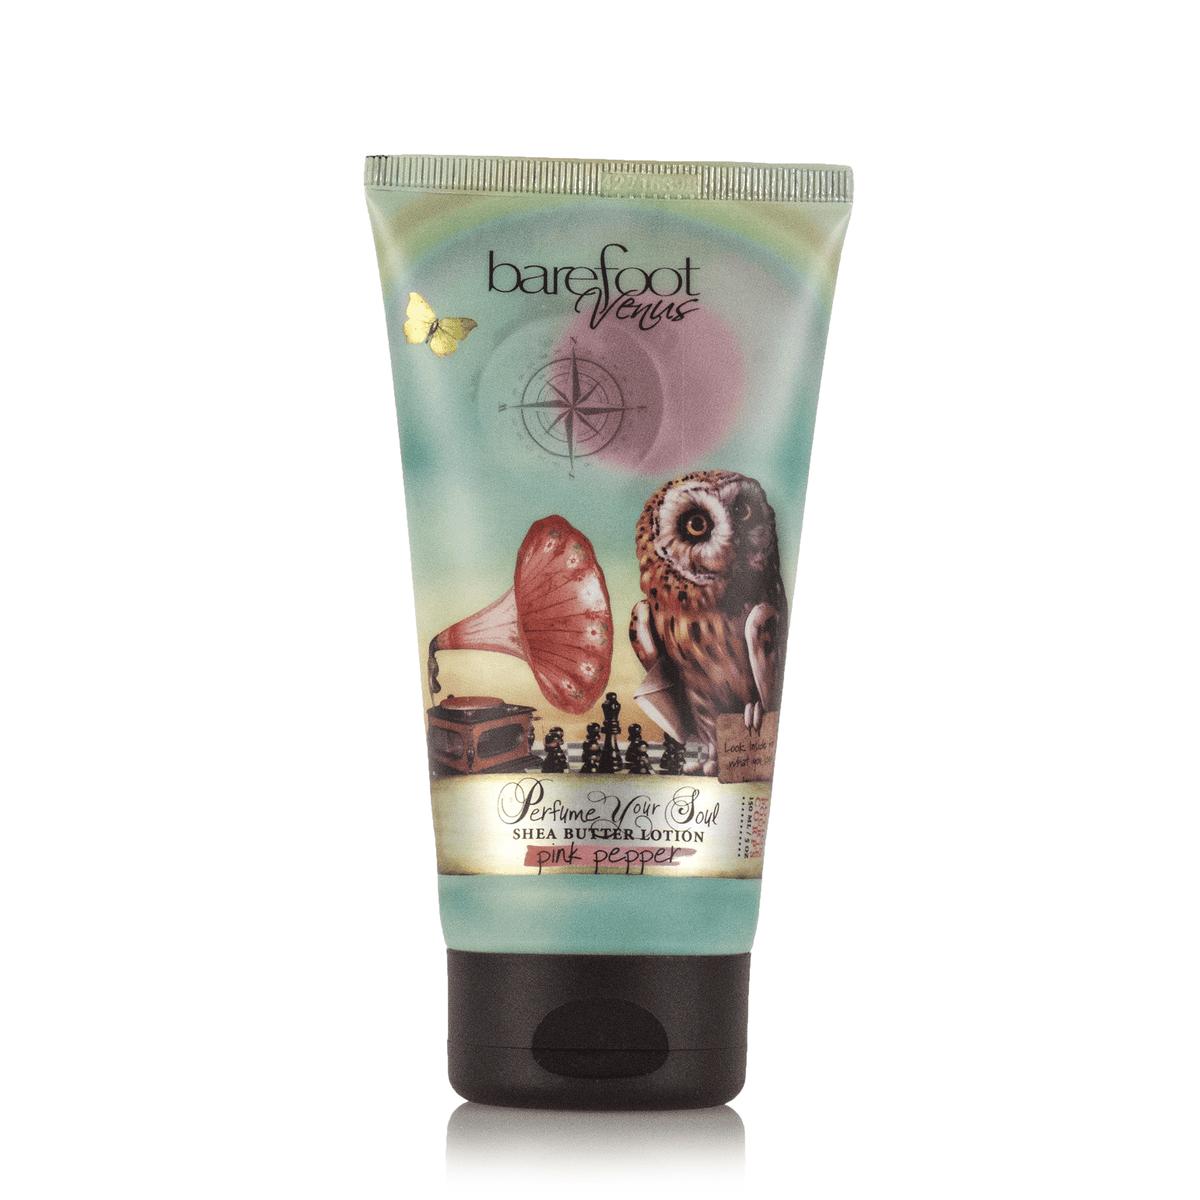 Pink Pepper Lotion CLOAK SKIN IN SILKY-SMOOTHNESS. Barefoot Venus